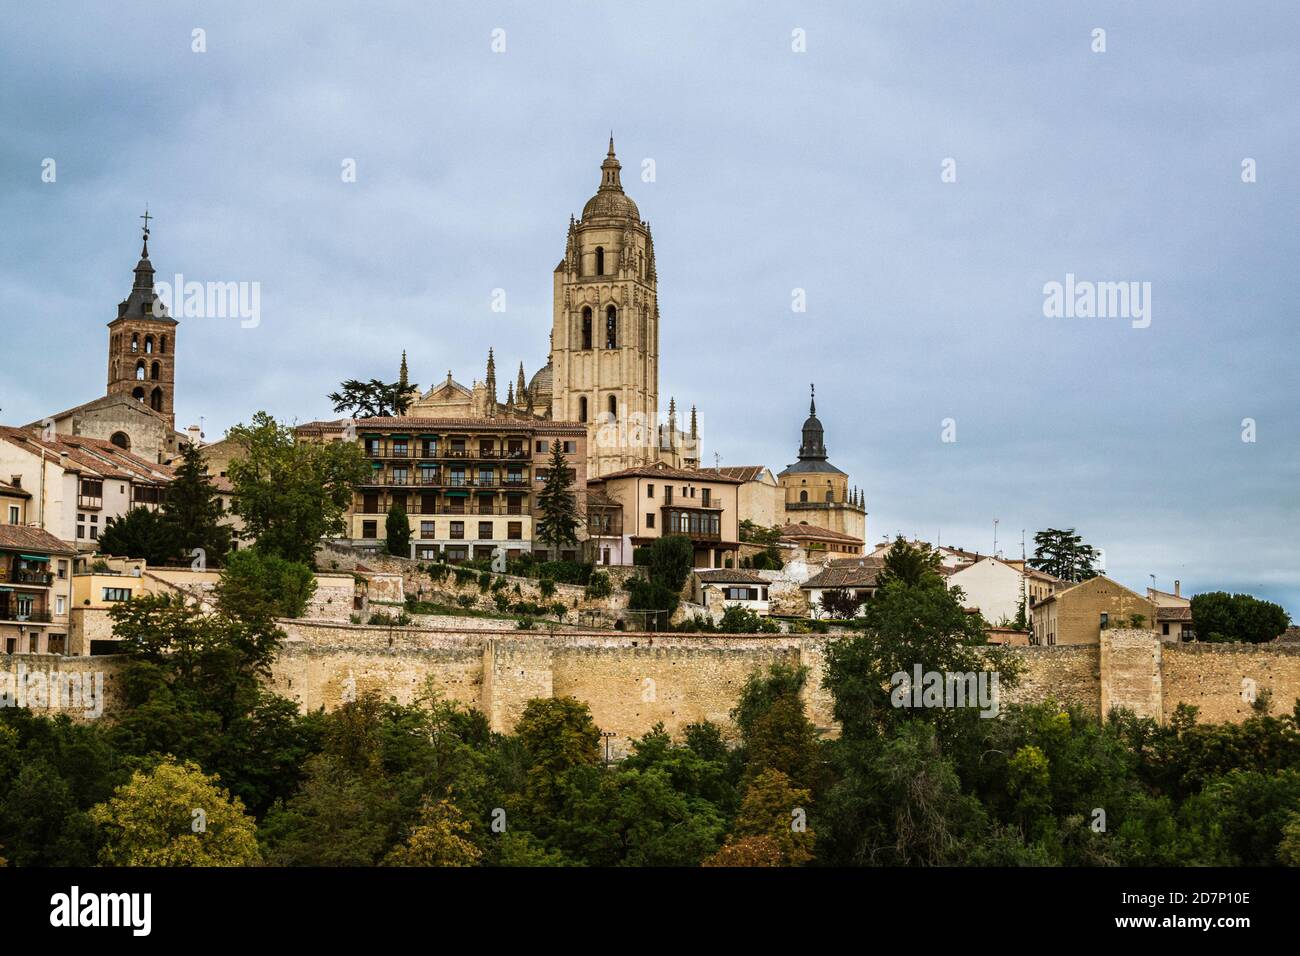 Skyline of the old town Segovia with the prominent cathedral bell tower. Stock Photo